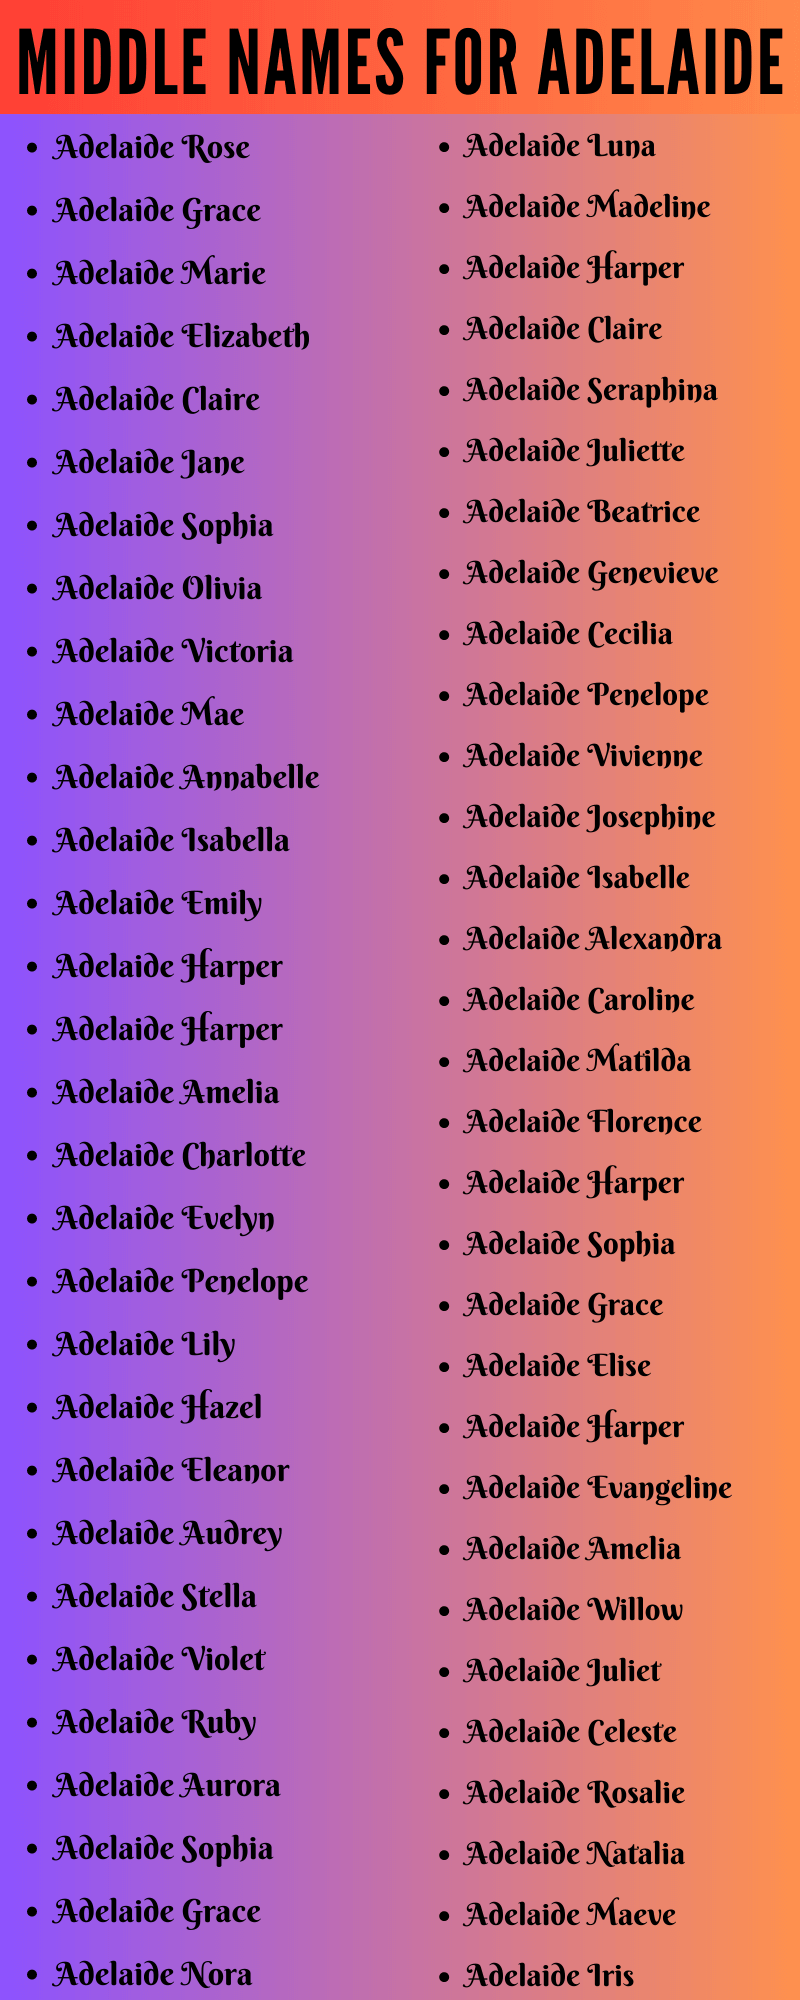 400 Cute Middle Names For Adelaide